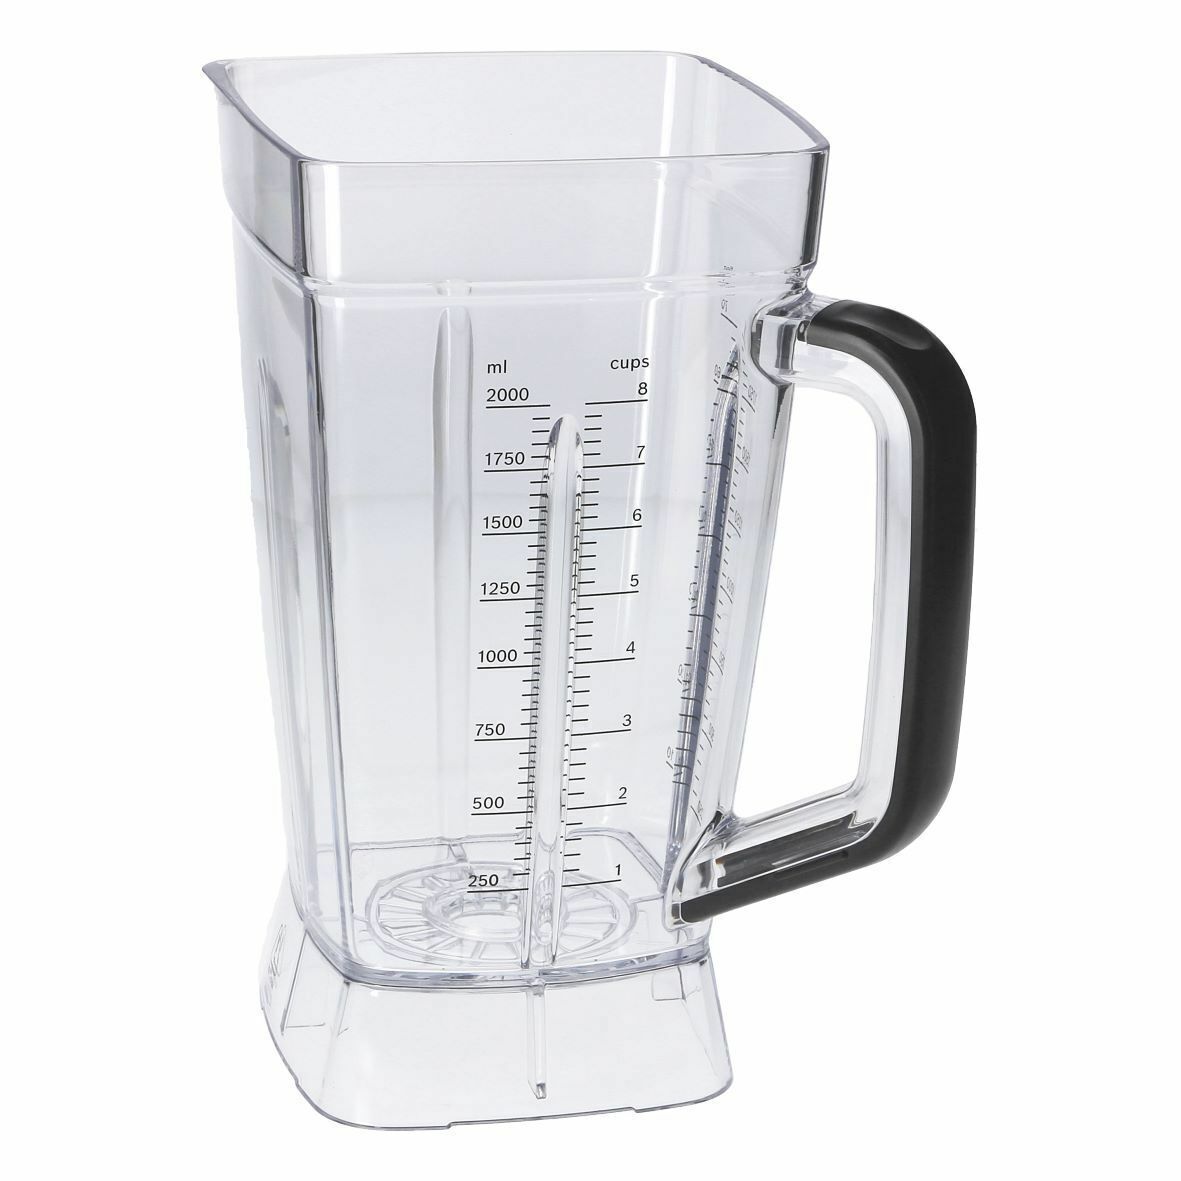 Mixing cup 2L plastic without lid BOSCH 11019994 for blender